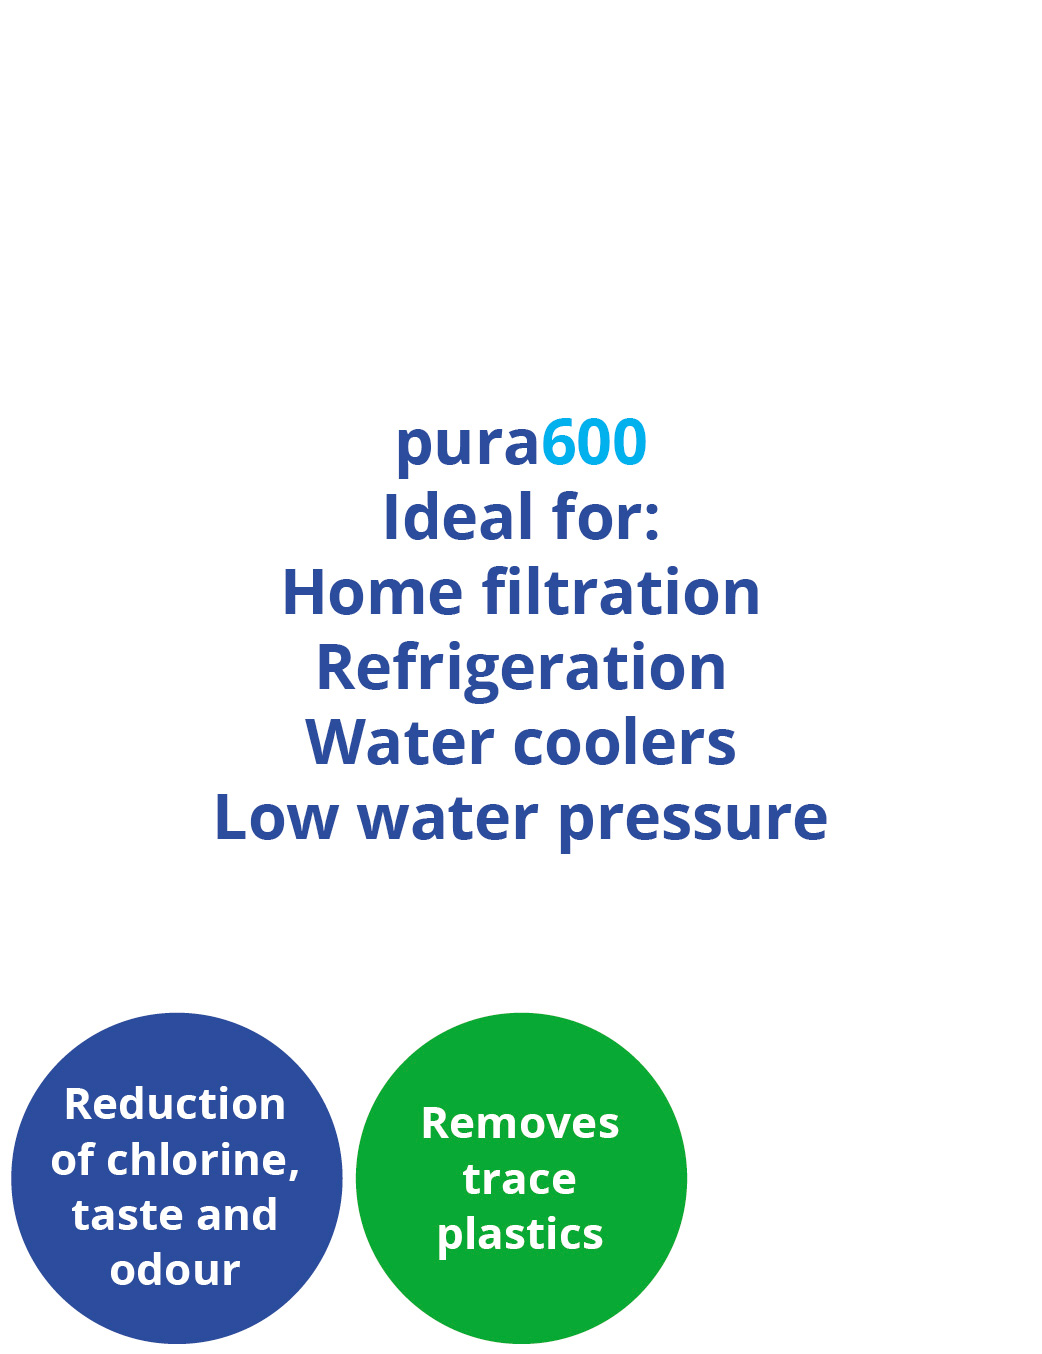 pura600 Advanced Water Filter for low water pressure